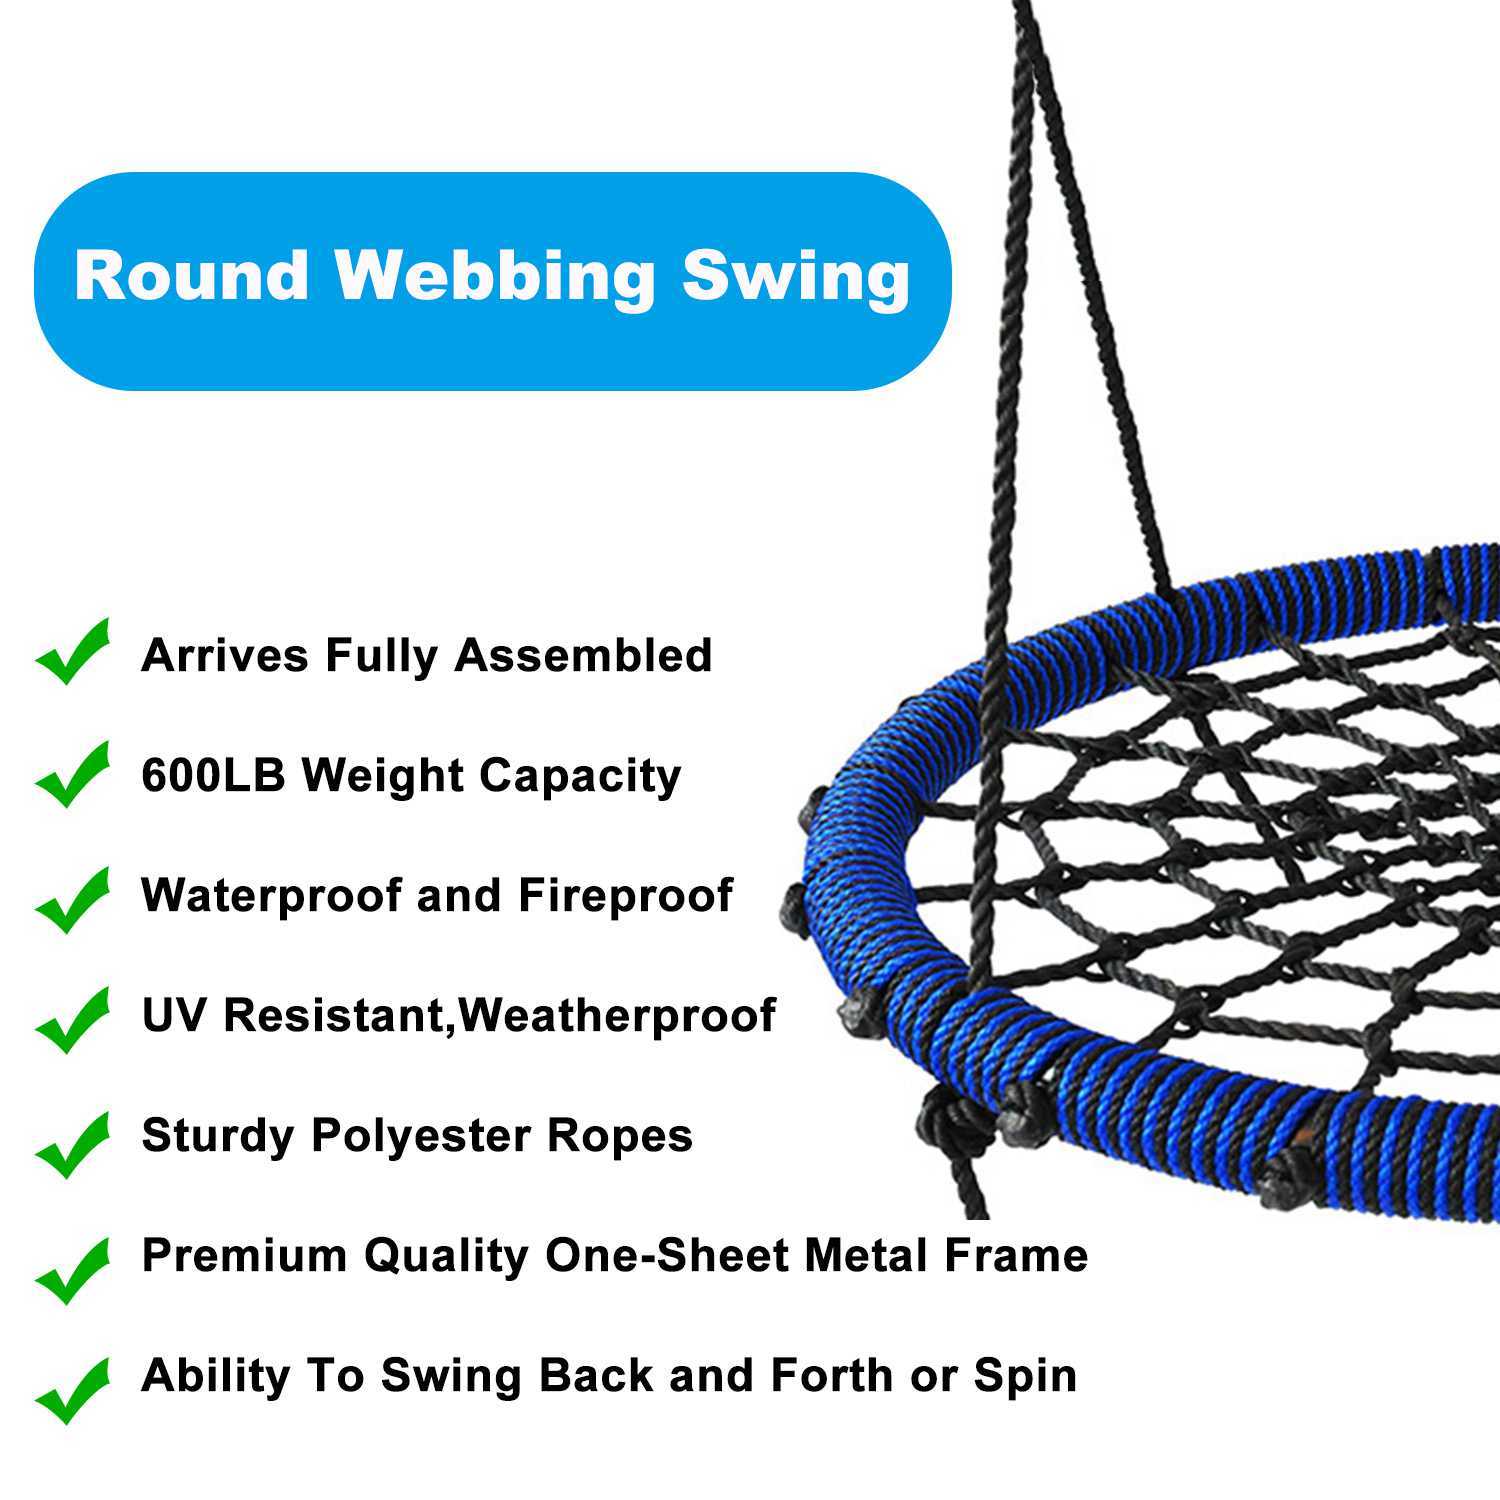 web swing,spider web tree swing for adults,round net swing with frame,PC-MC02 Blue Spider Net Tree Swing Round Web Rope Swing Fun for Multiple Kids or Adult